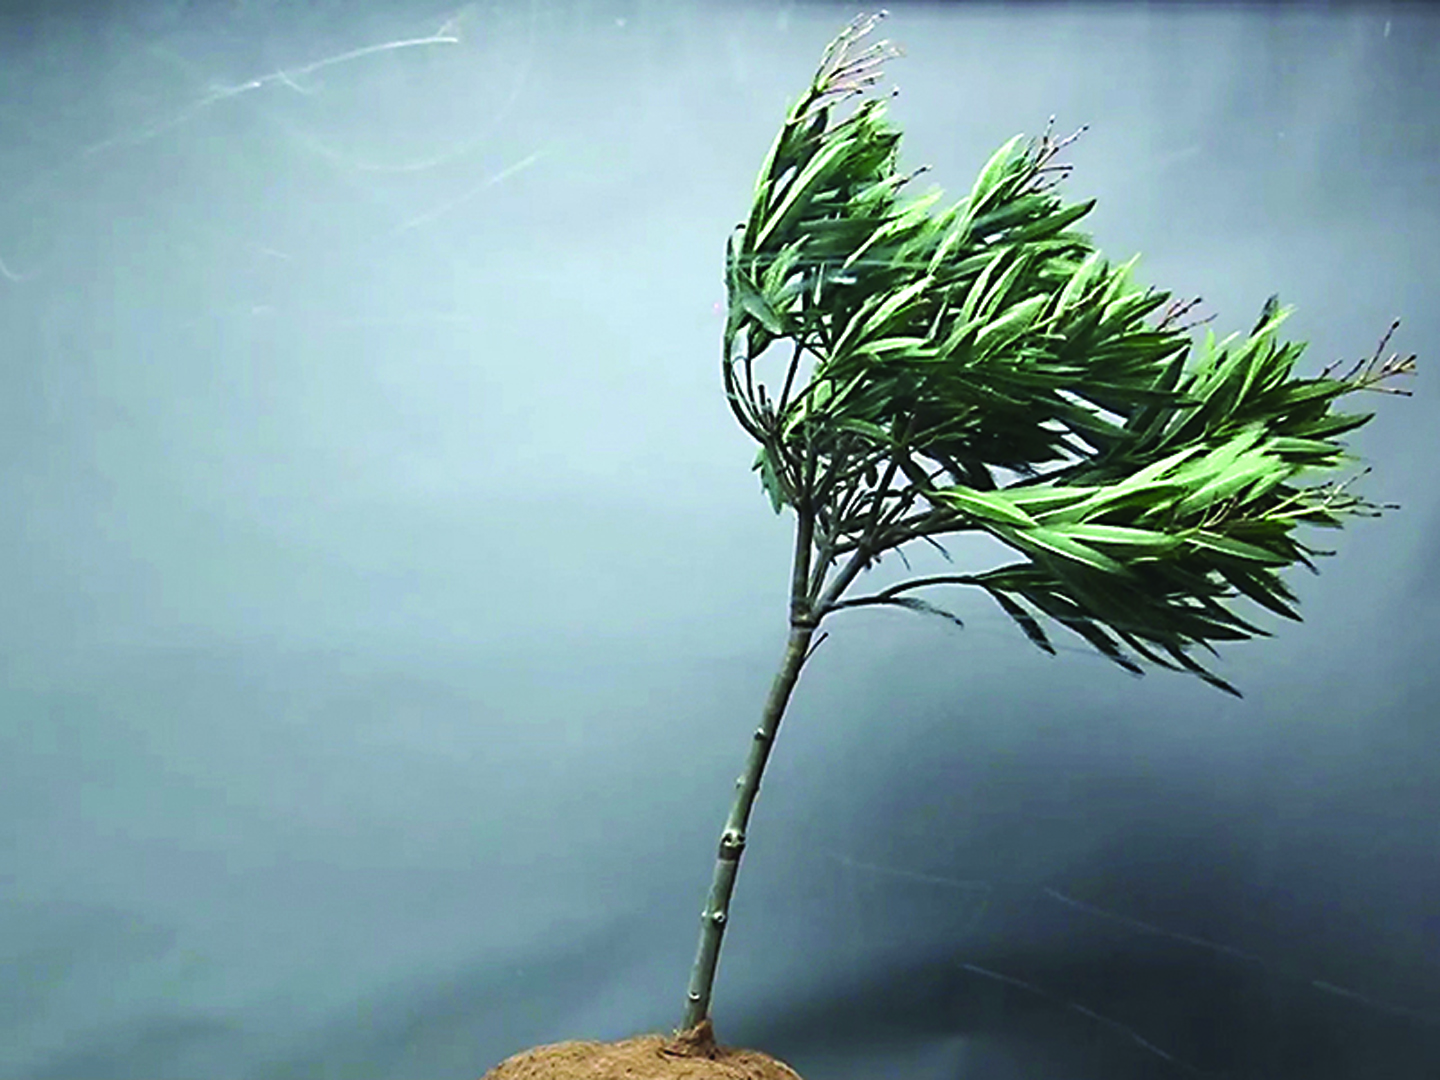 ©2015, Élène Tremblay, Effects of the Wind on a Small Tree